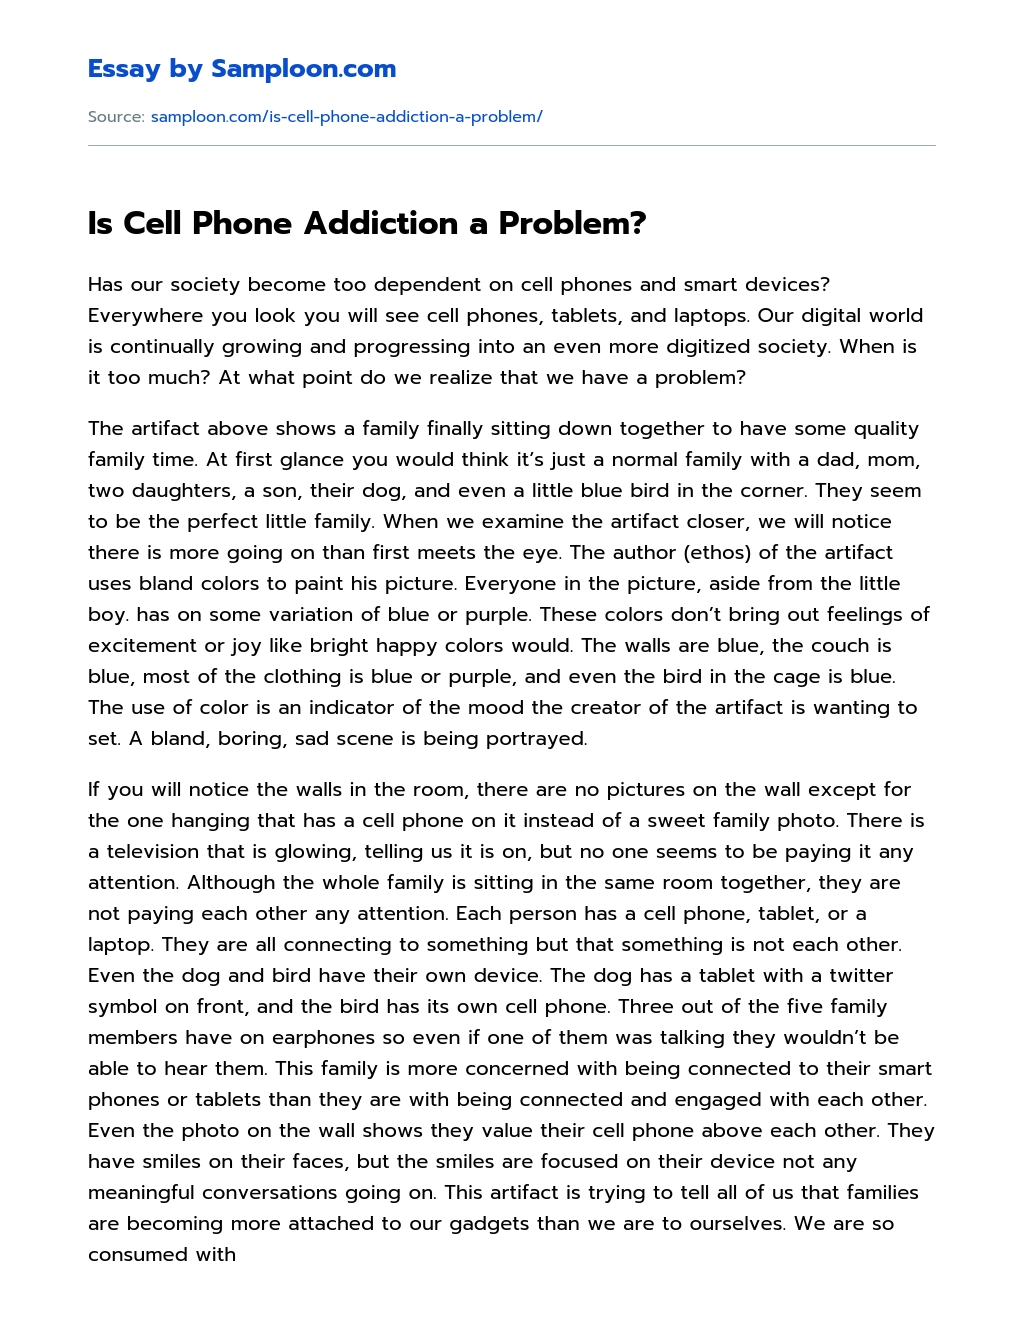 Is Cell Phone Addiction a Problem? essay